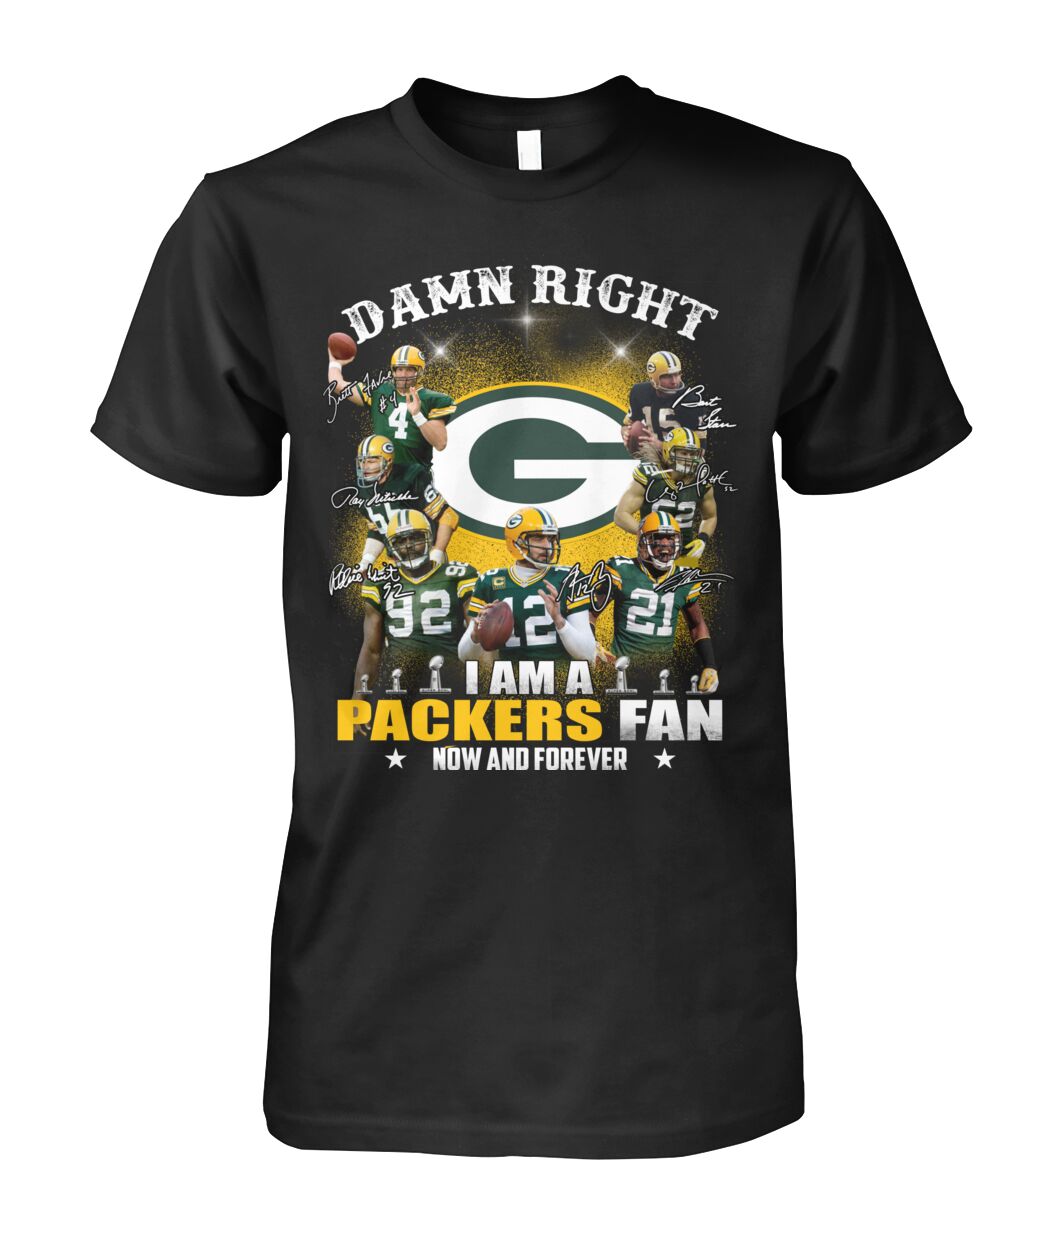 Green Bay Packers damn right im a Packers fan now and forever shirt hoodie 1